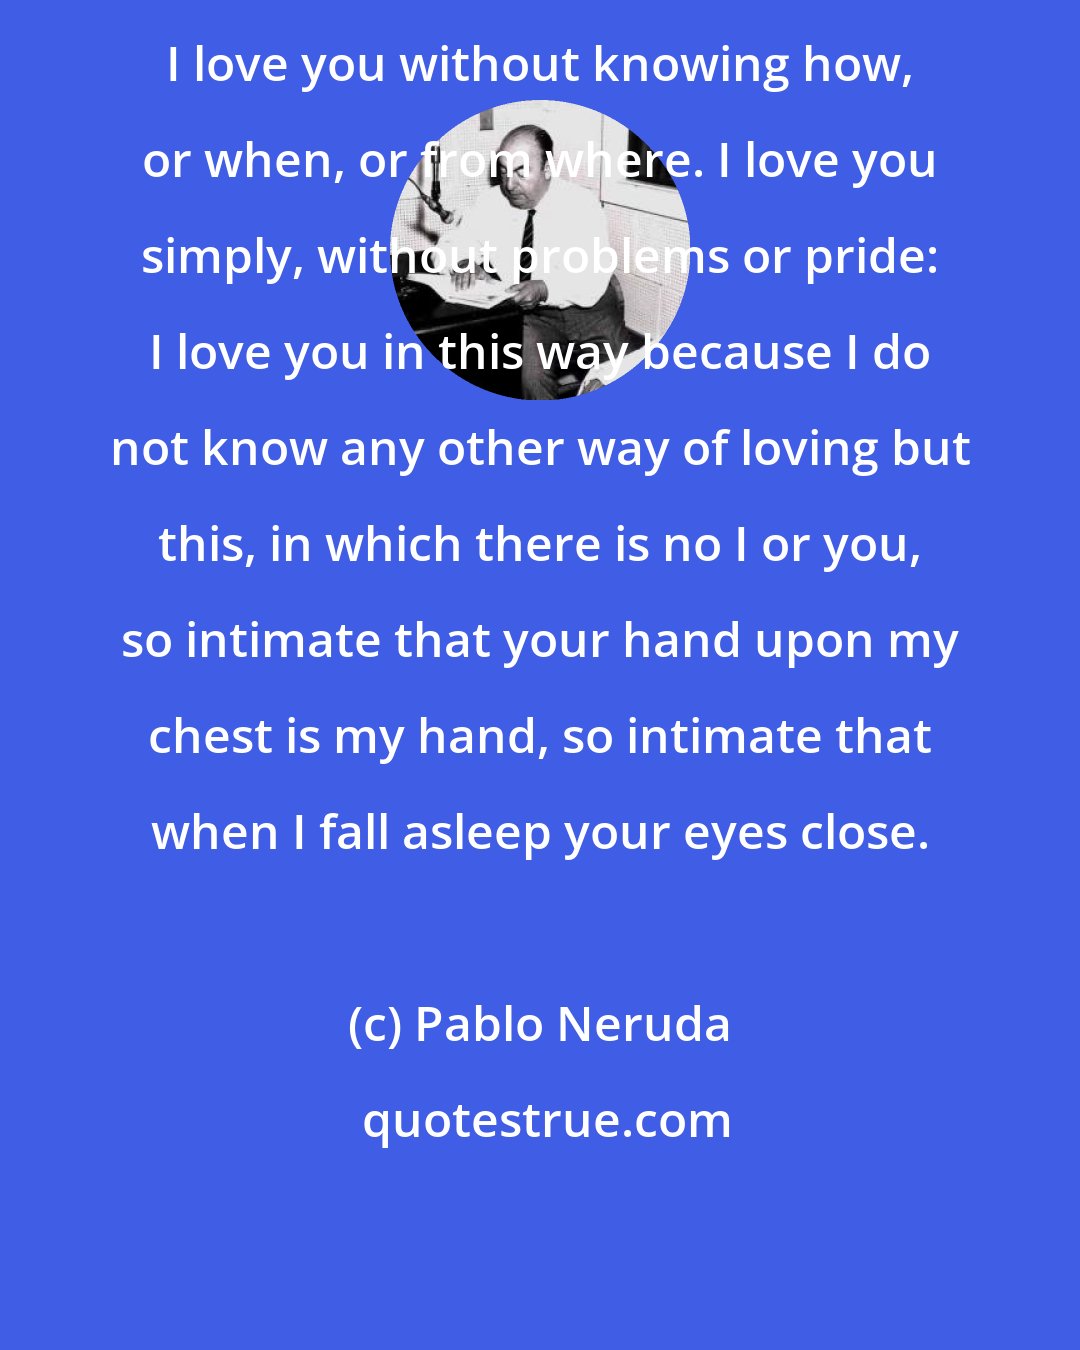 Pablo Neruda: I love you without knowing how, or when, or from where. I love you simply, without problems or pride: I love you in this way because I do not know any other way of loving but this, in which there is no I or you, so intimate that your hand upon my chest is my hand, so intimate that when I fall asleep your eyes close.